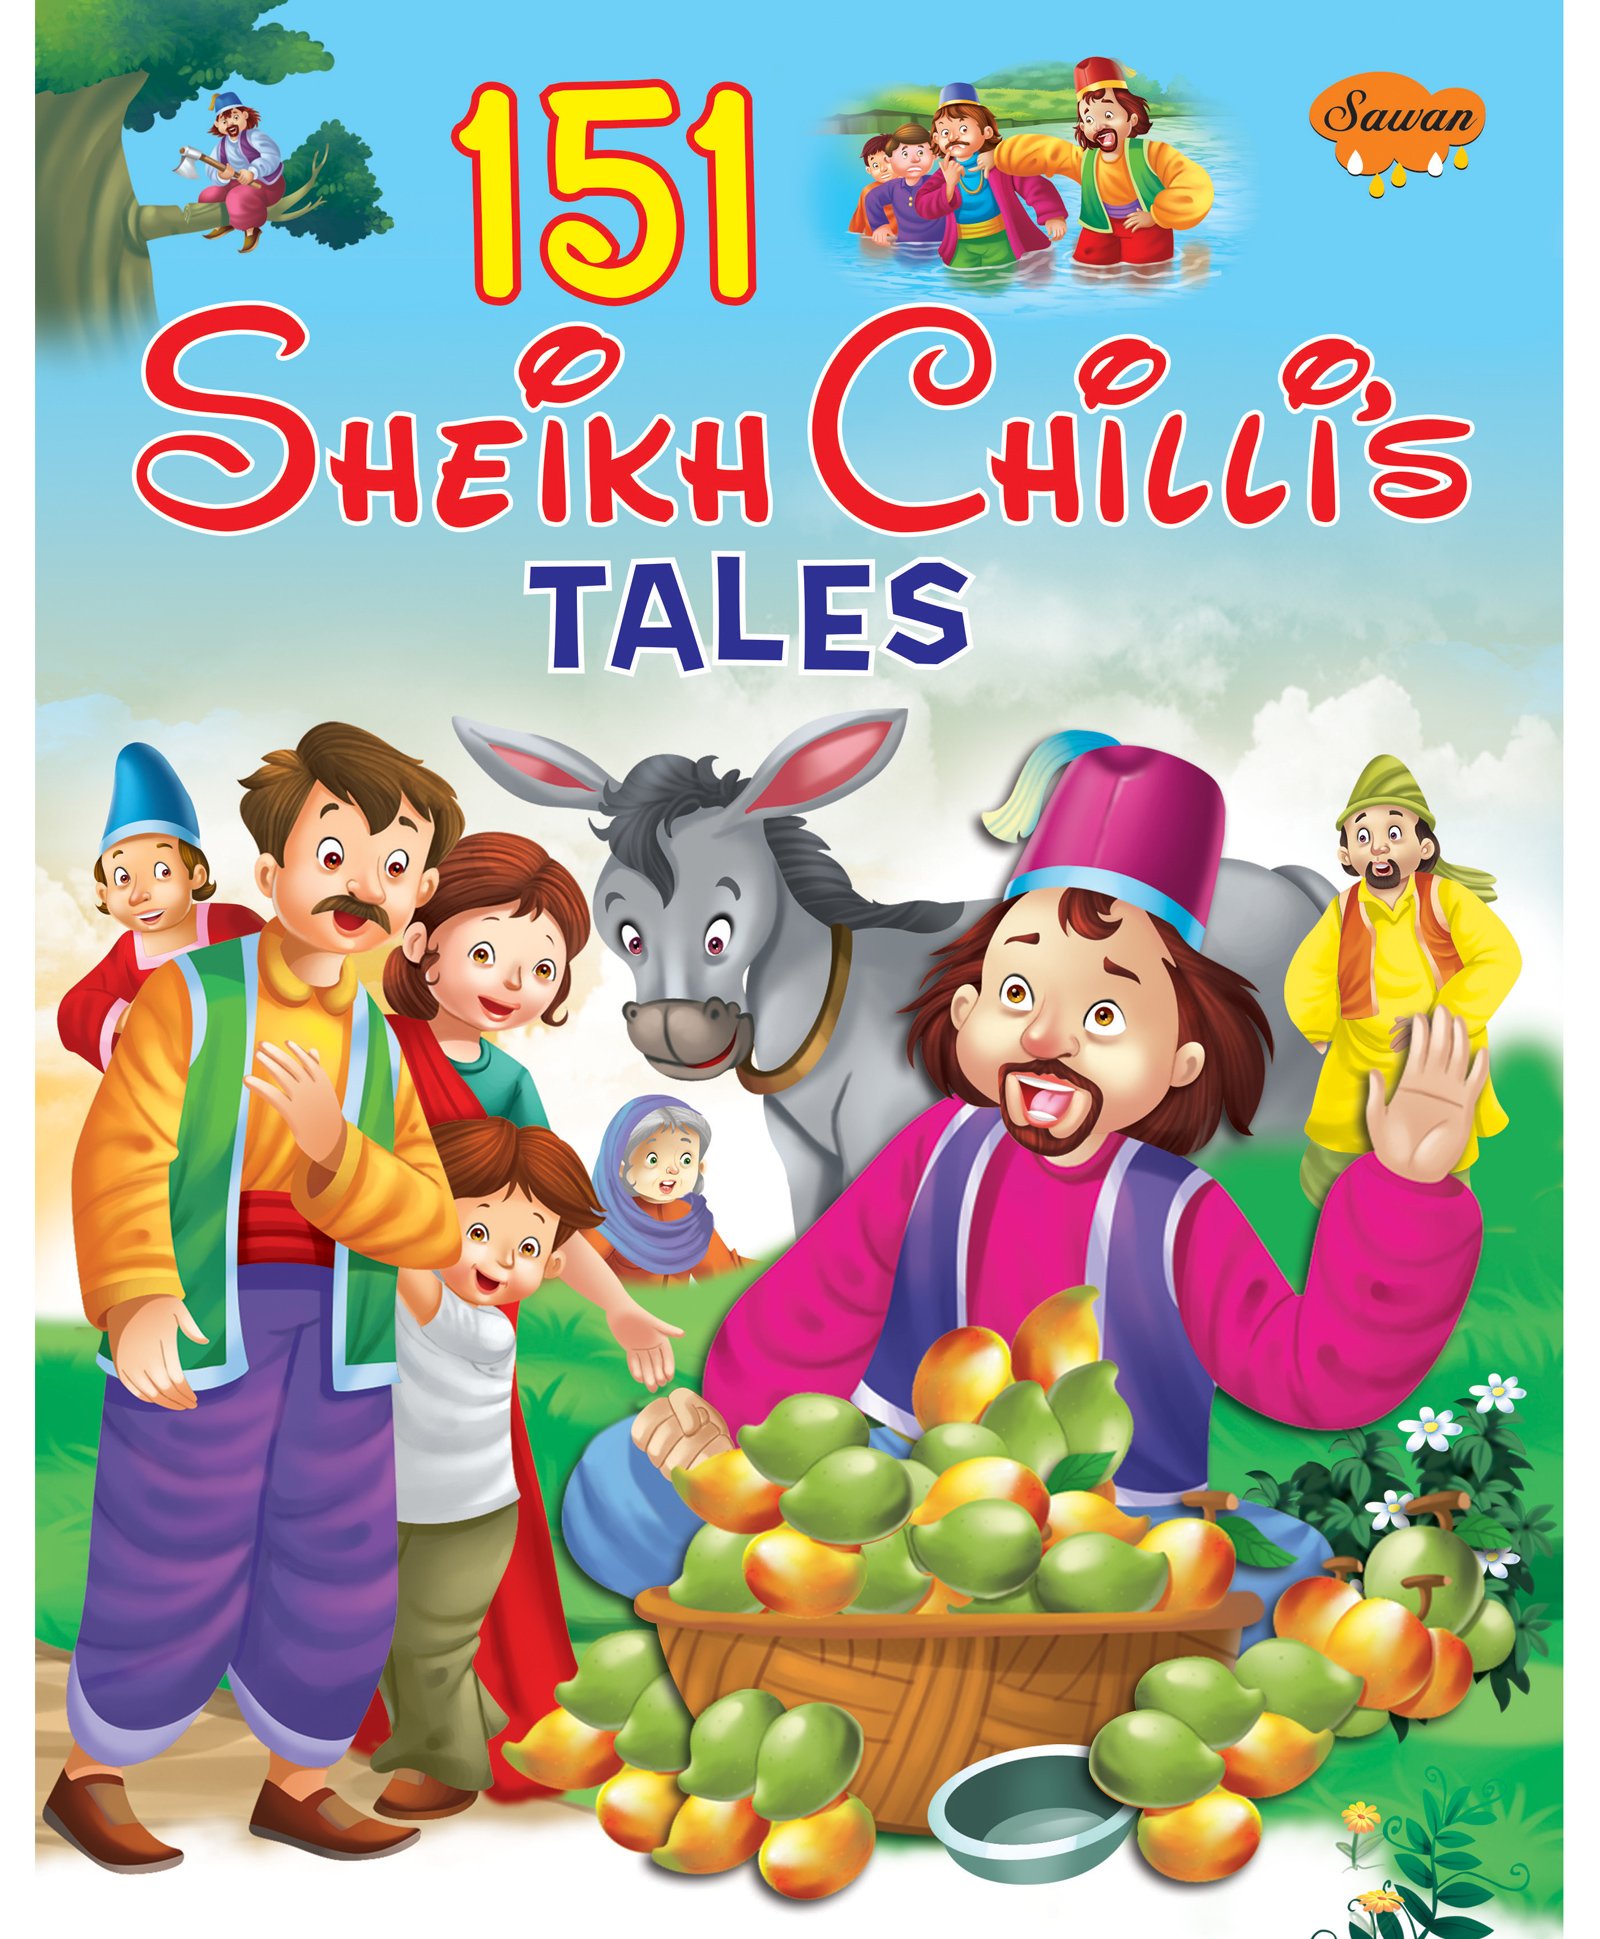 Sawan 151 Sheikh Chilli's Tales Book - English Online in India, Buy at Best  Price from  - 3322400